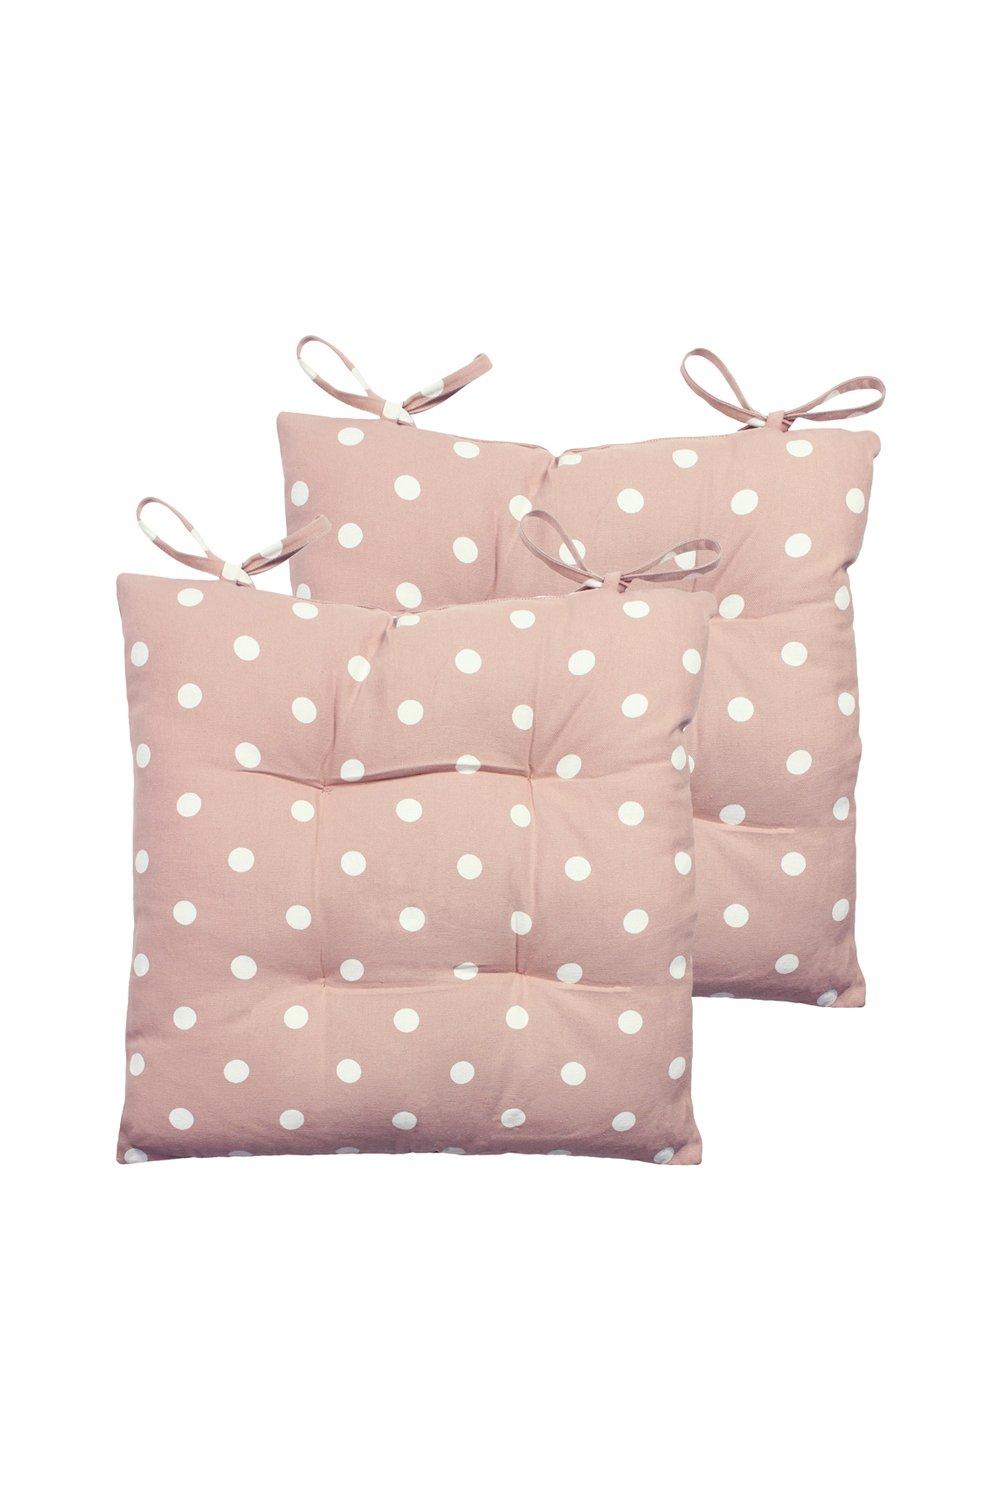 Picture of Polka Dot Blush Seat Pads 2 Pack